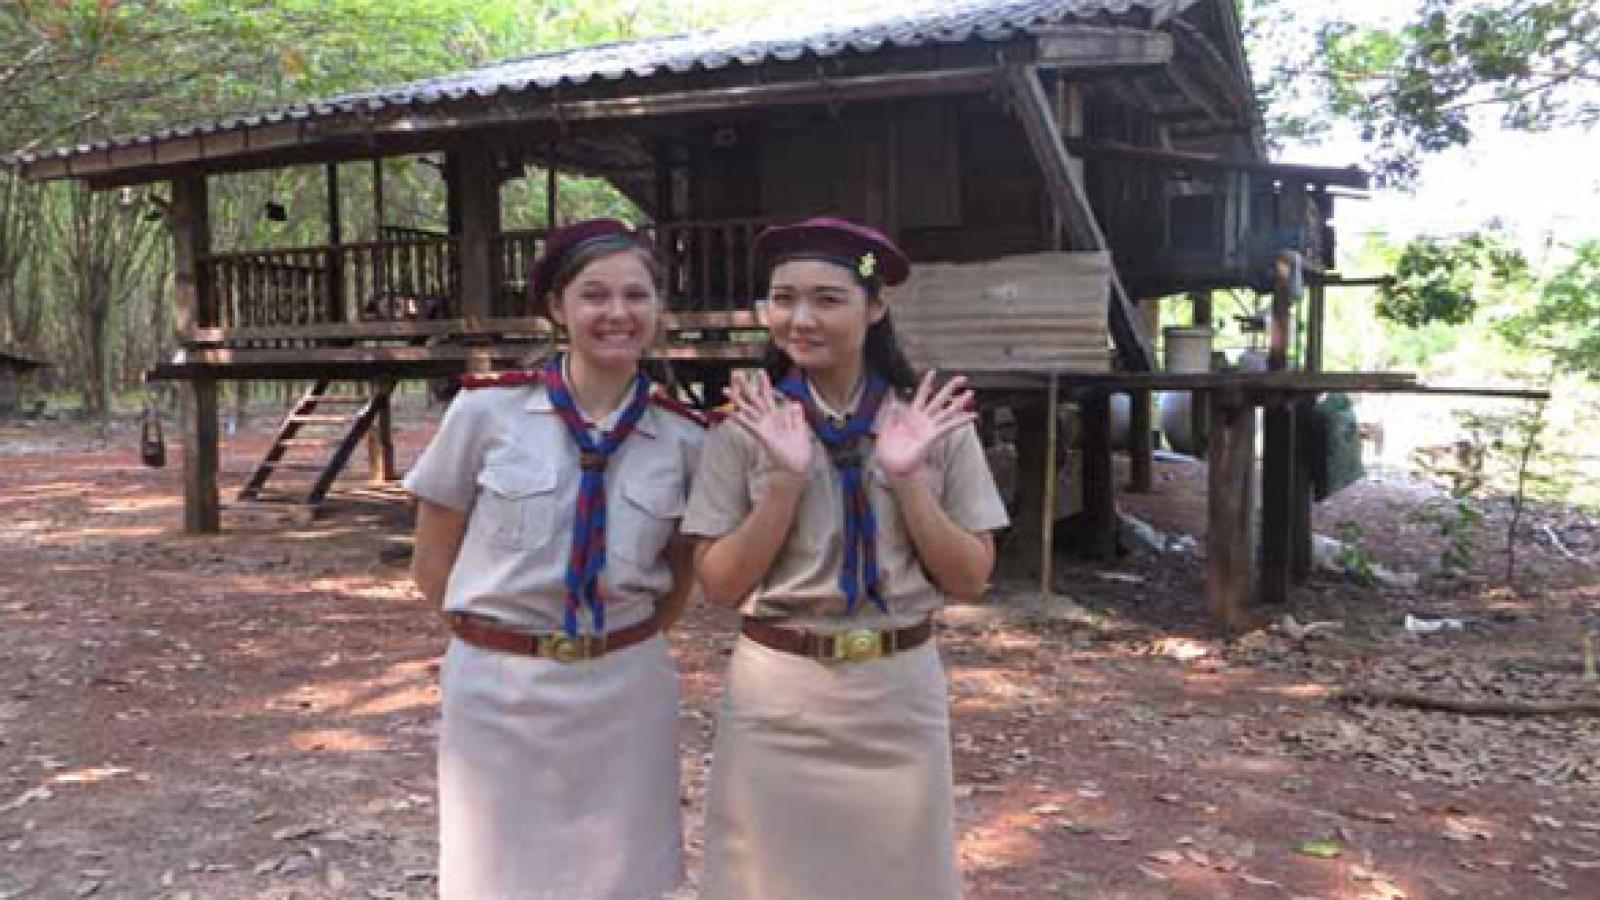 Alyssa Jeswald with one of her English students in Thailand.